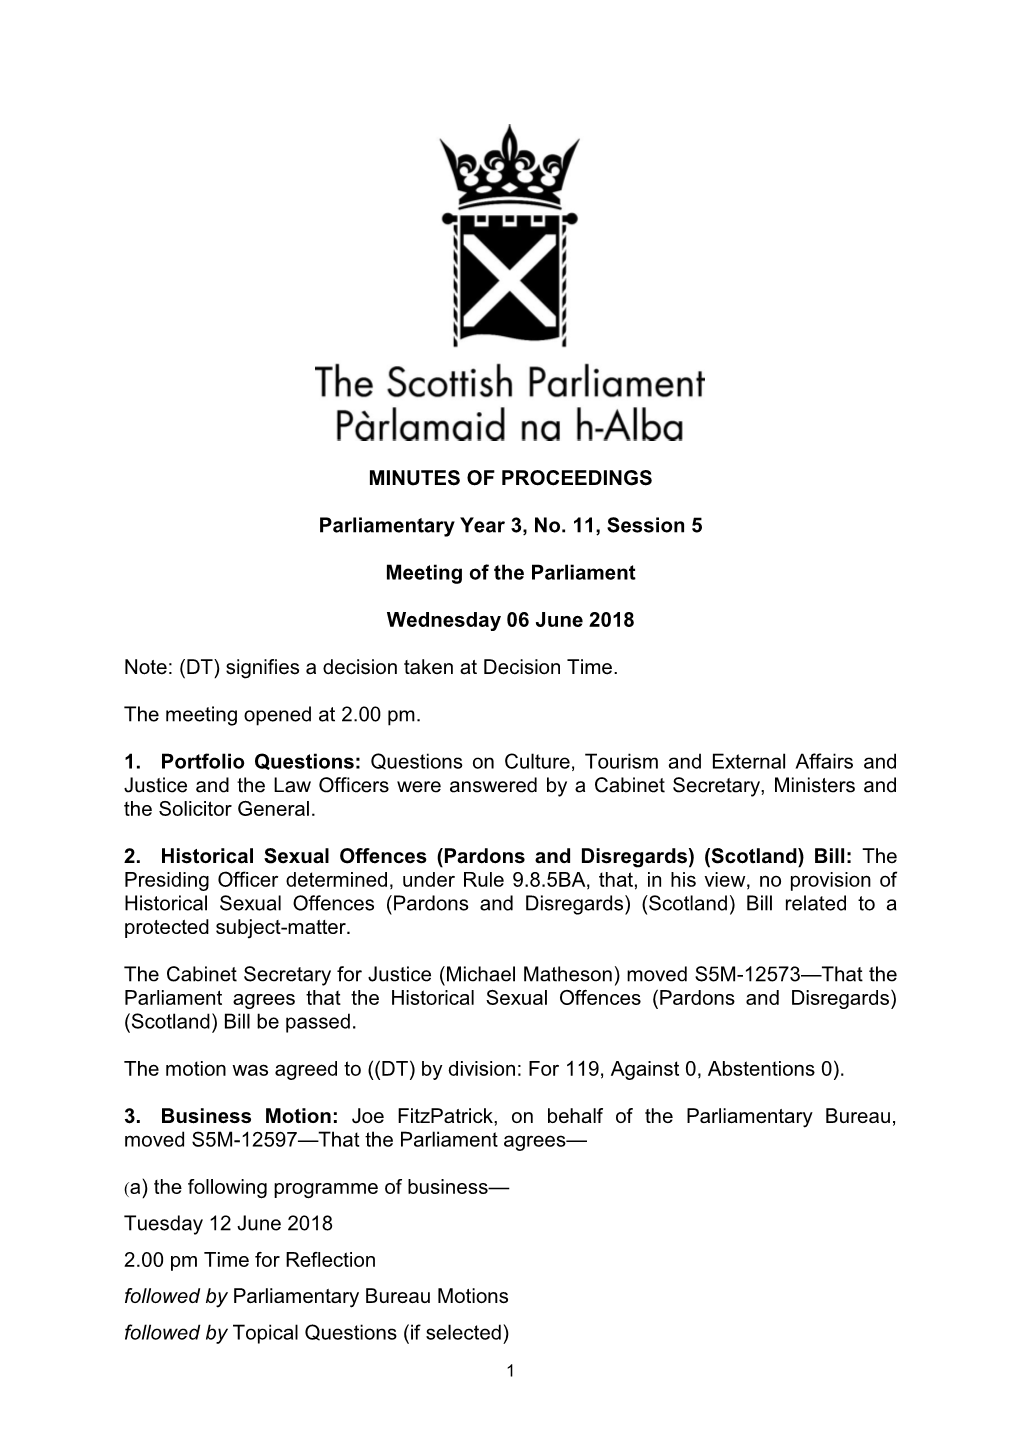 MINUTES of PROCEEDINGS Parliamentary Year 3, No. 11